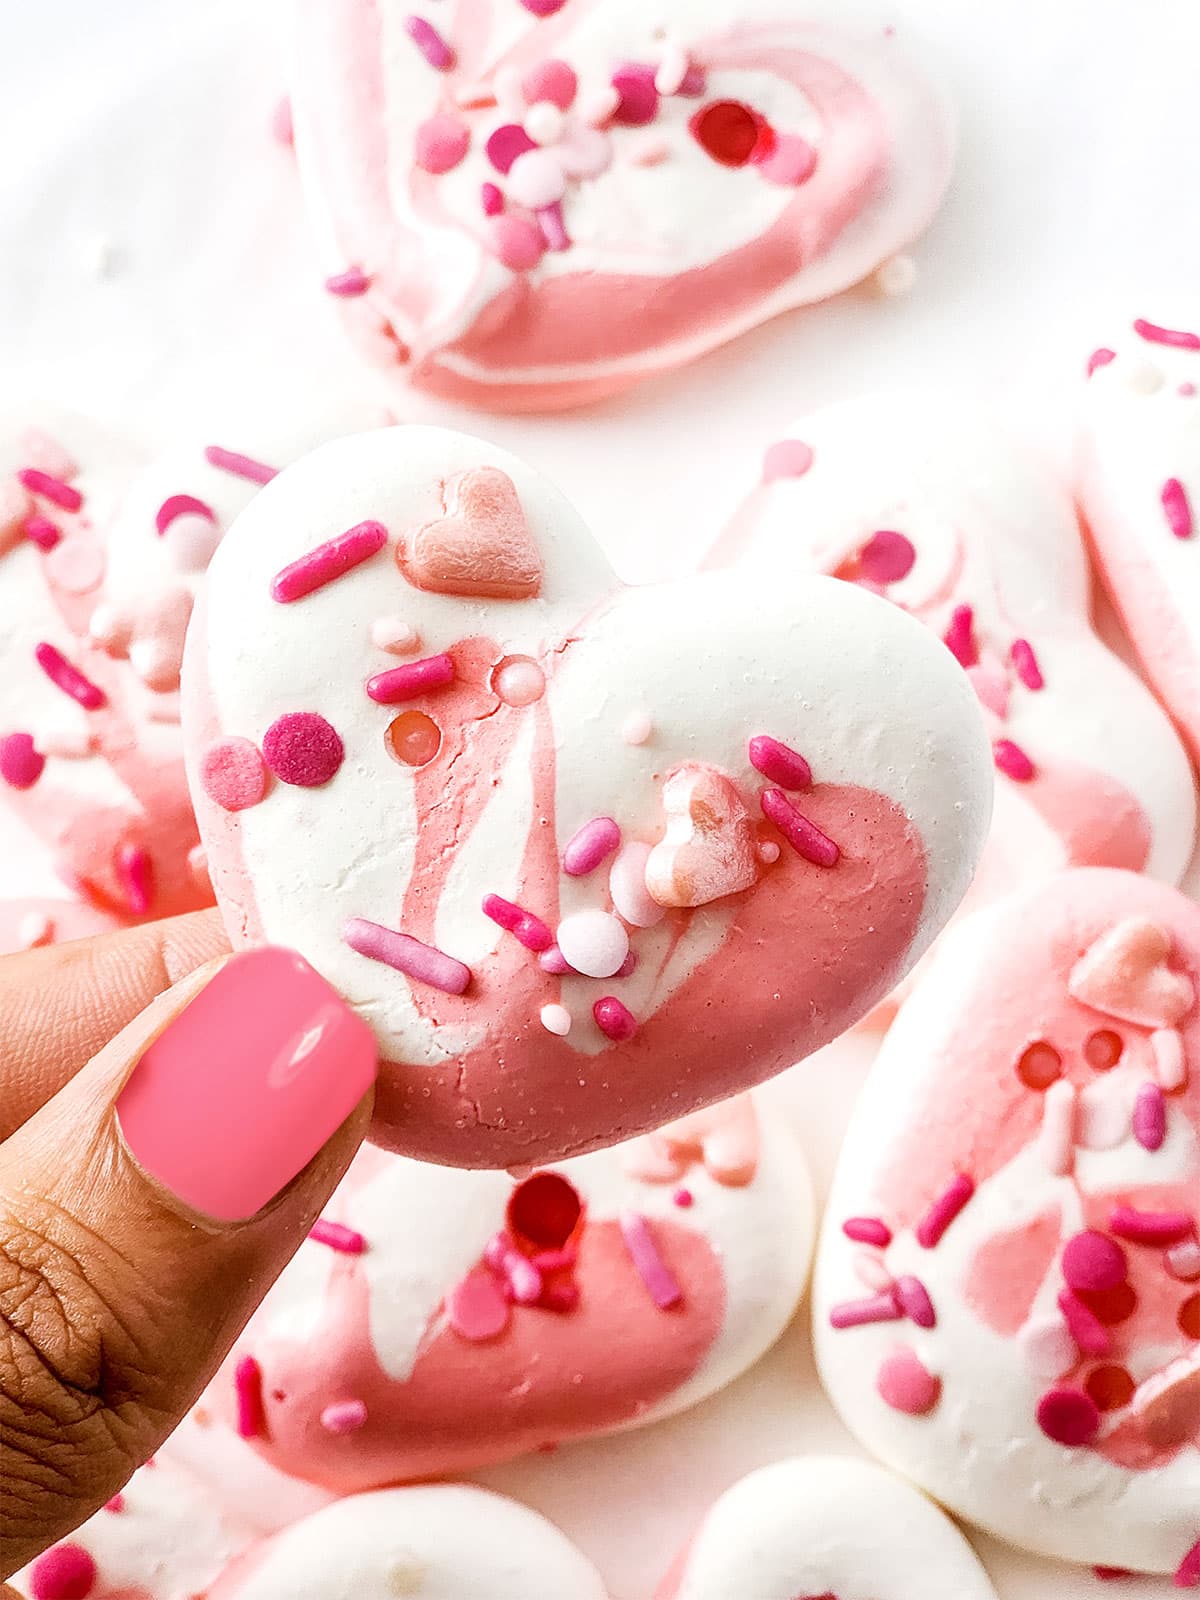 Holding pink and white meringue cookie.